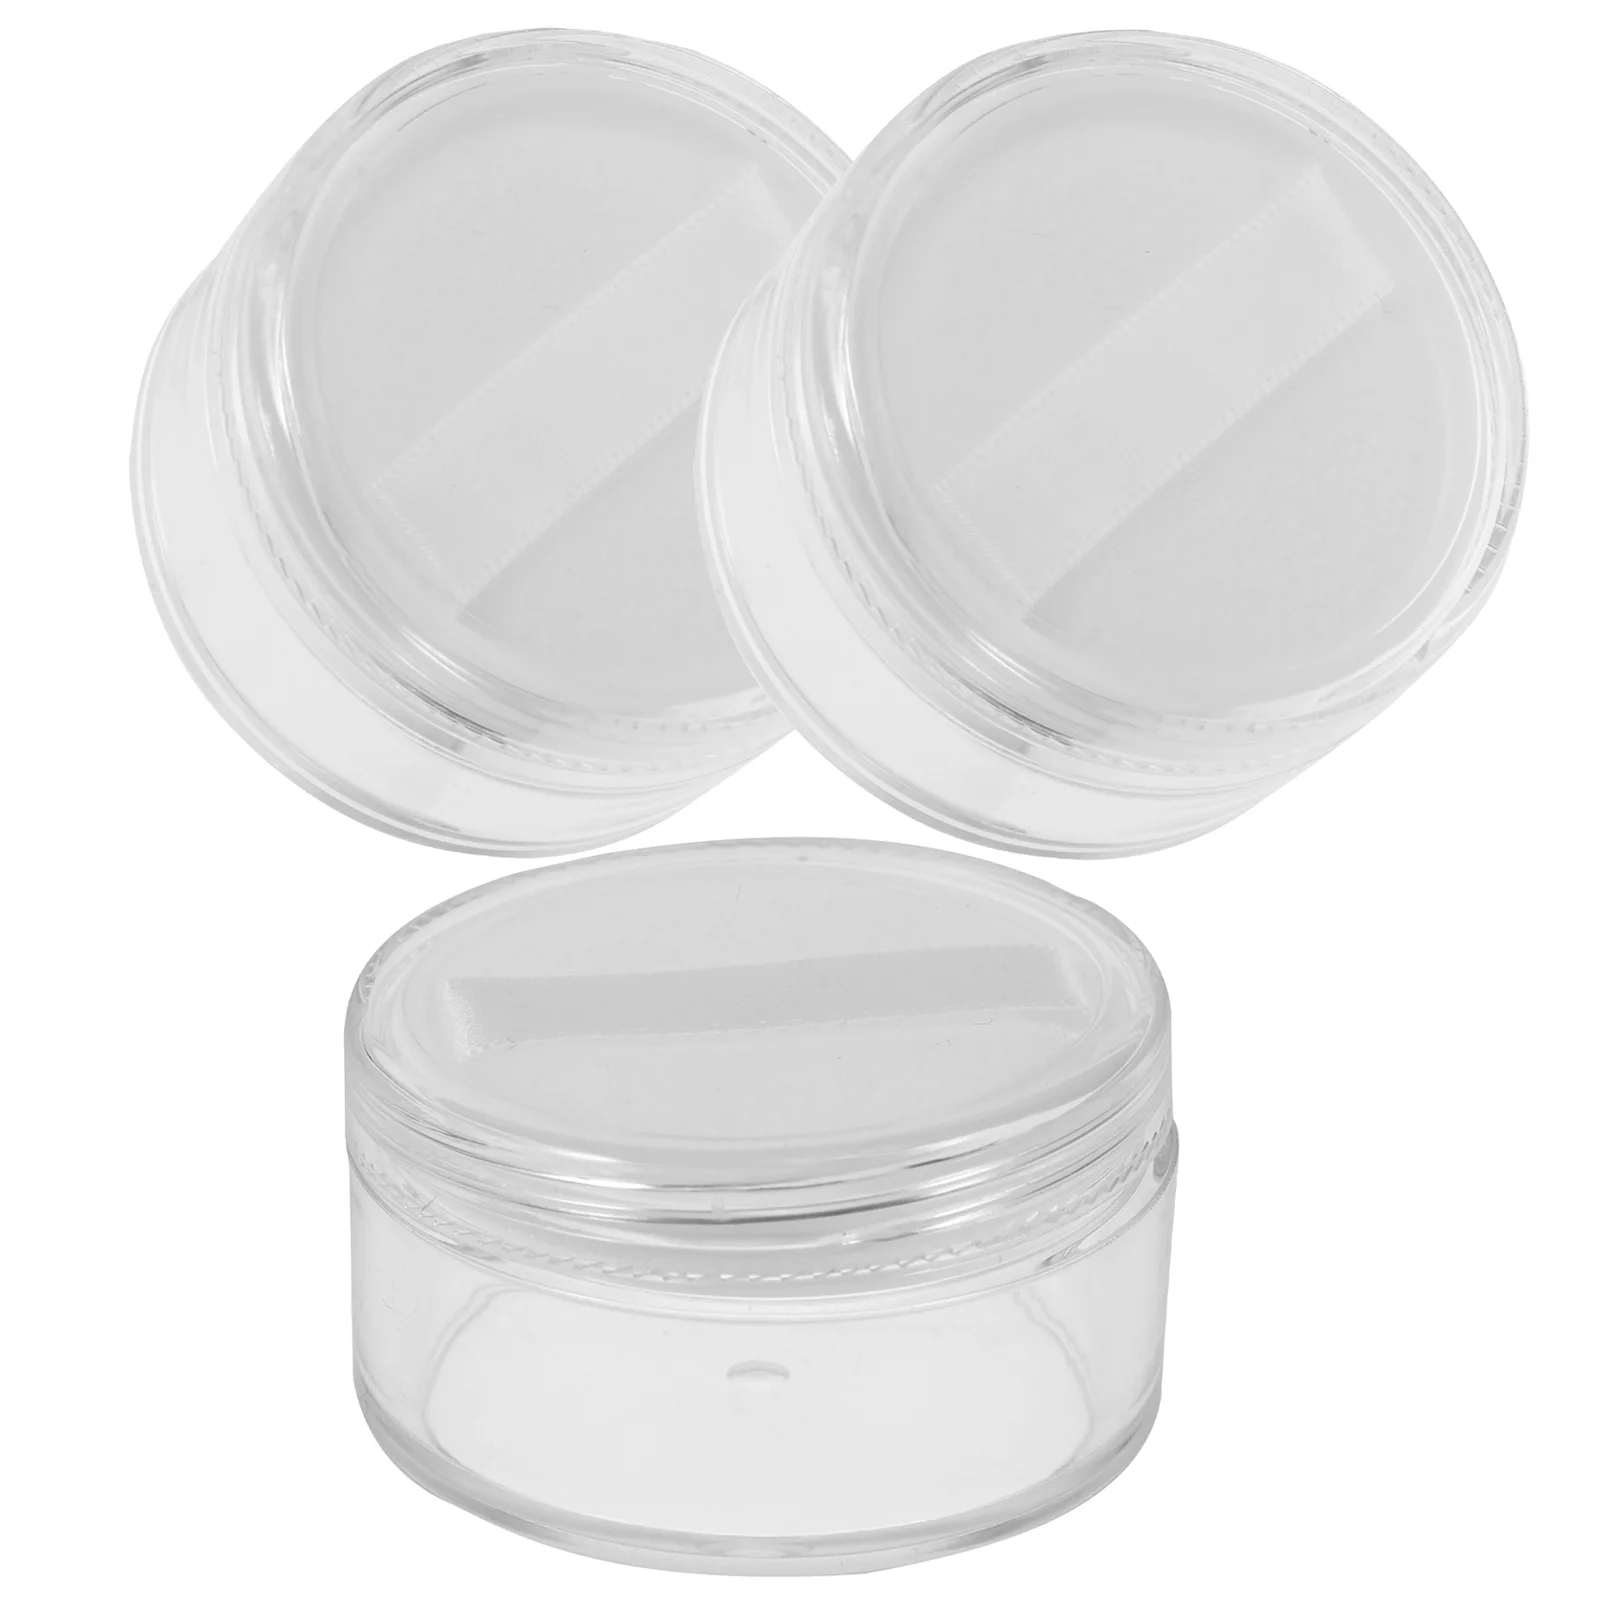 

3Pcs Empty Loose Powder Case Portable Transparent Powder Puff Box with Sponge Puff and Sifter Foundation Box for Travel ( 20g )